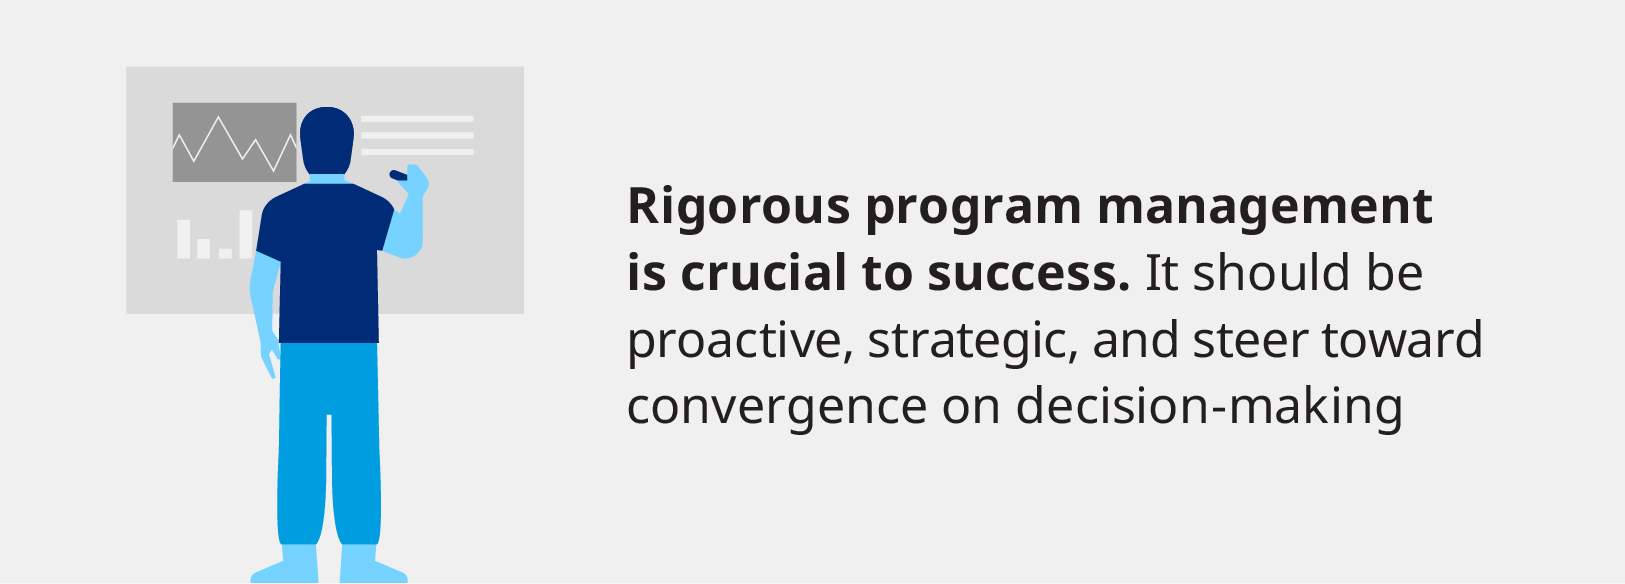 Rigourous program management is crucial to success. It should be proactive, strategic, and steer toward convergence on decision-making.